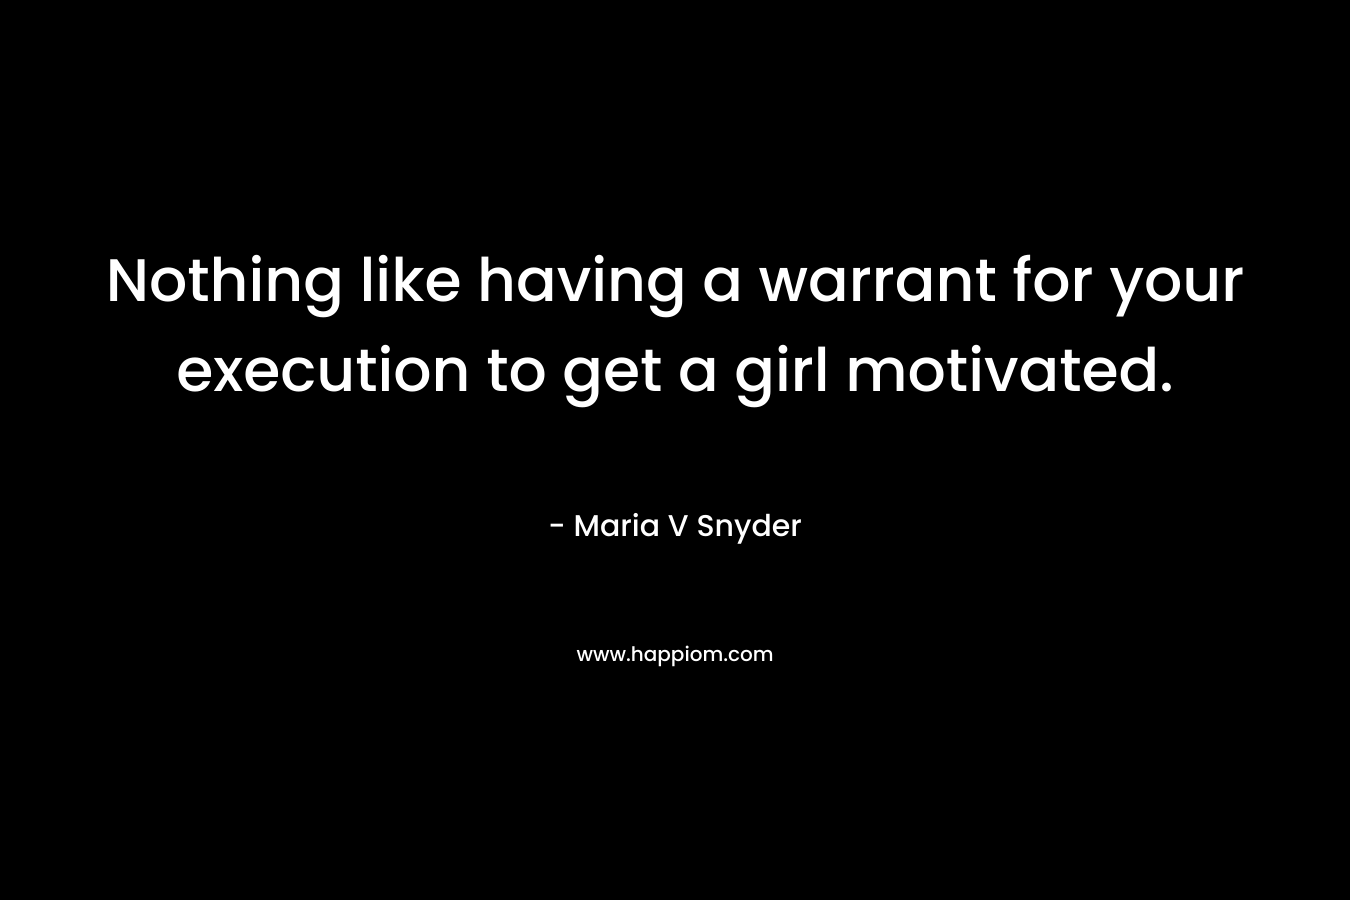 Nothing like having a warrant for your execution to get a girl motivated.